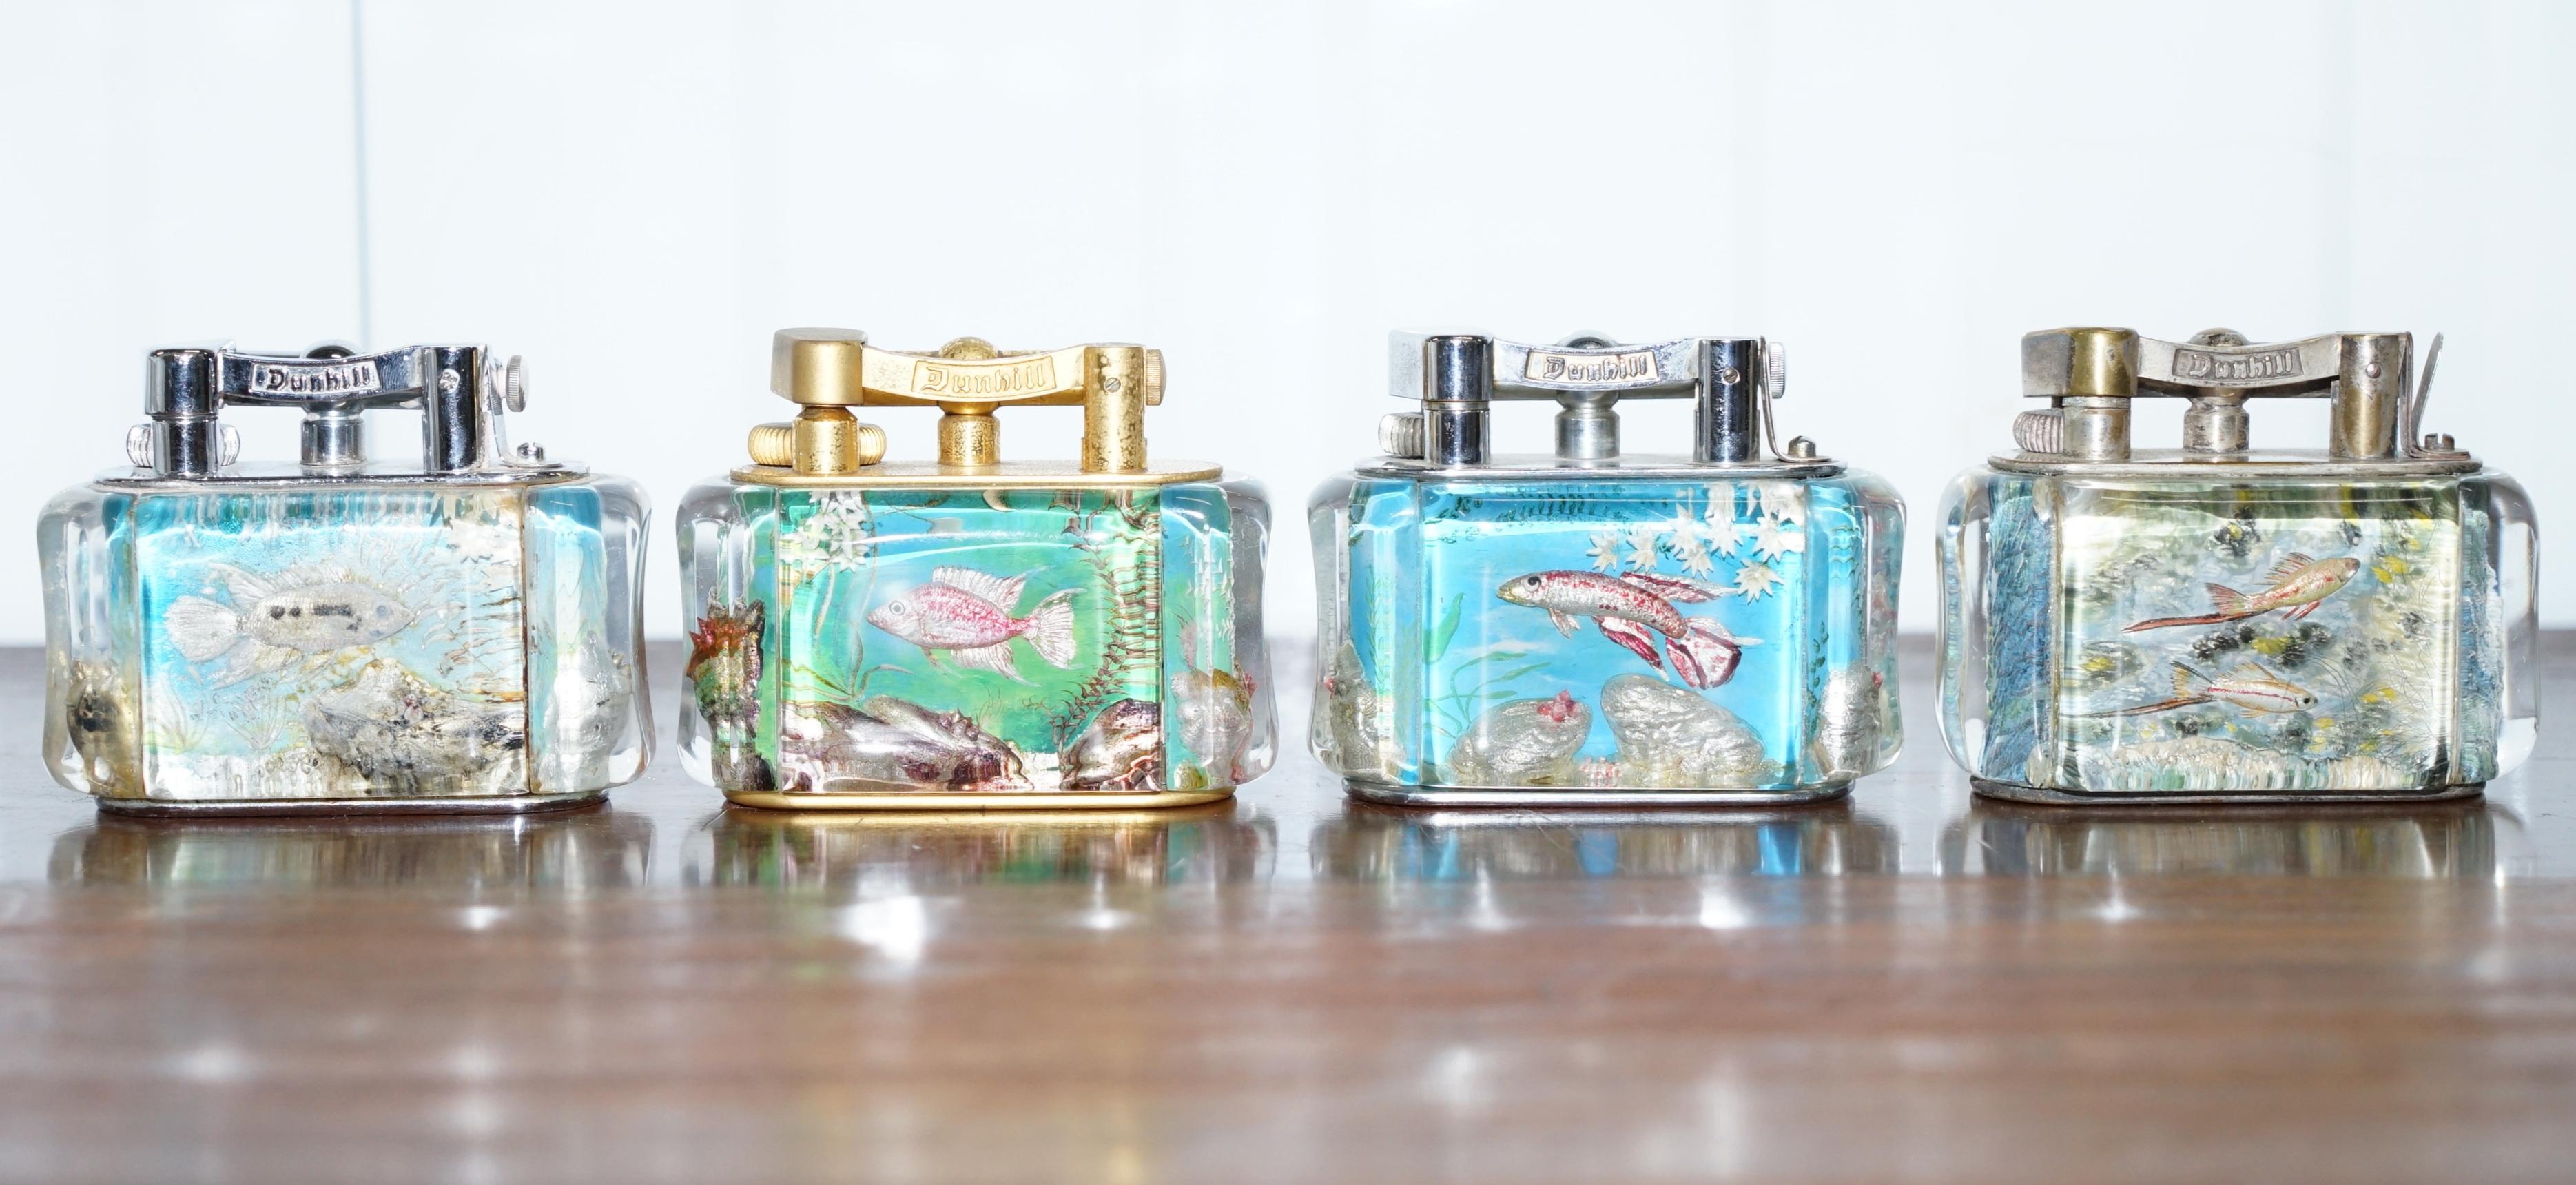 We are delighted to offer for same is this very rare original 1950’s handmade in England oversized Dunhill Aquarium table lighter.

They are all exceptionally rare, each piece is a one-off handmade item that will never be replicated again, the